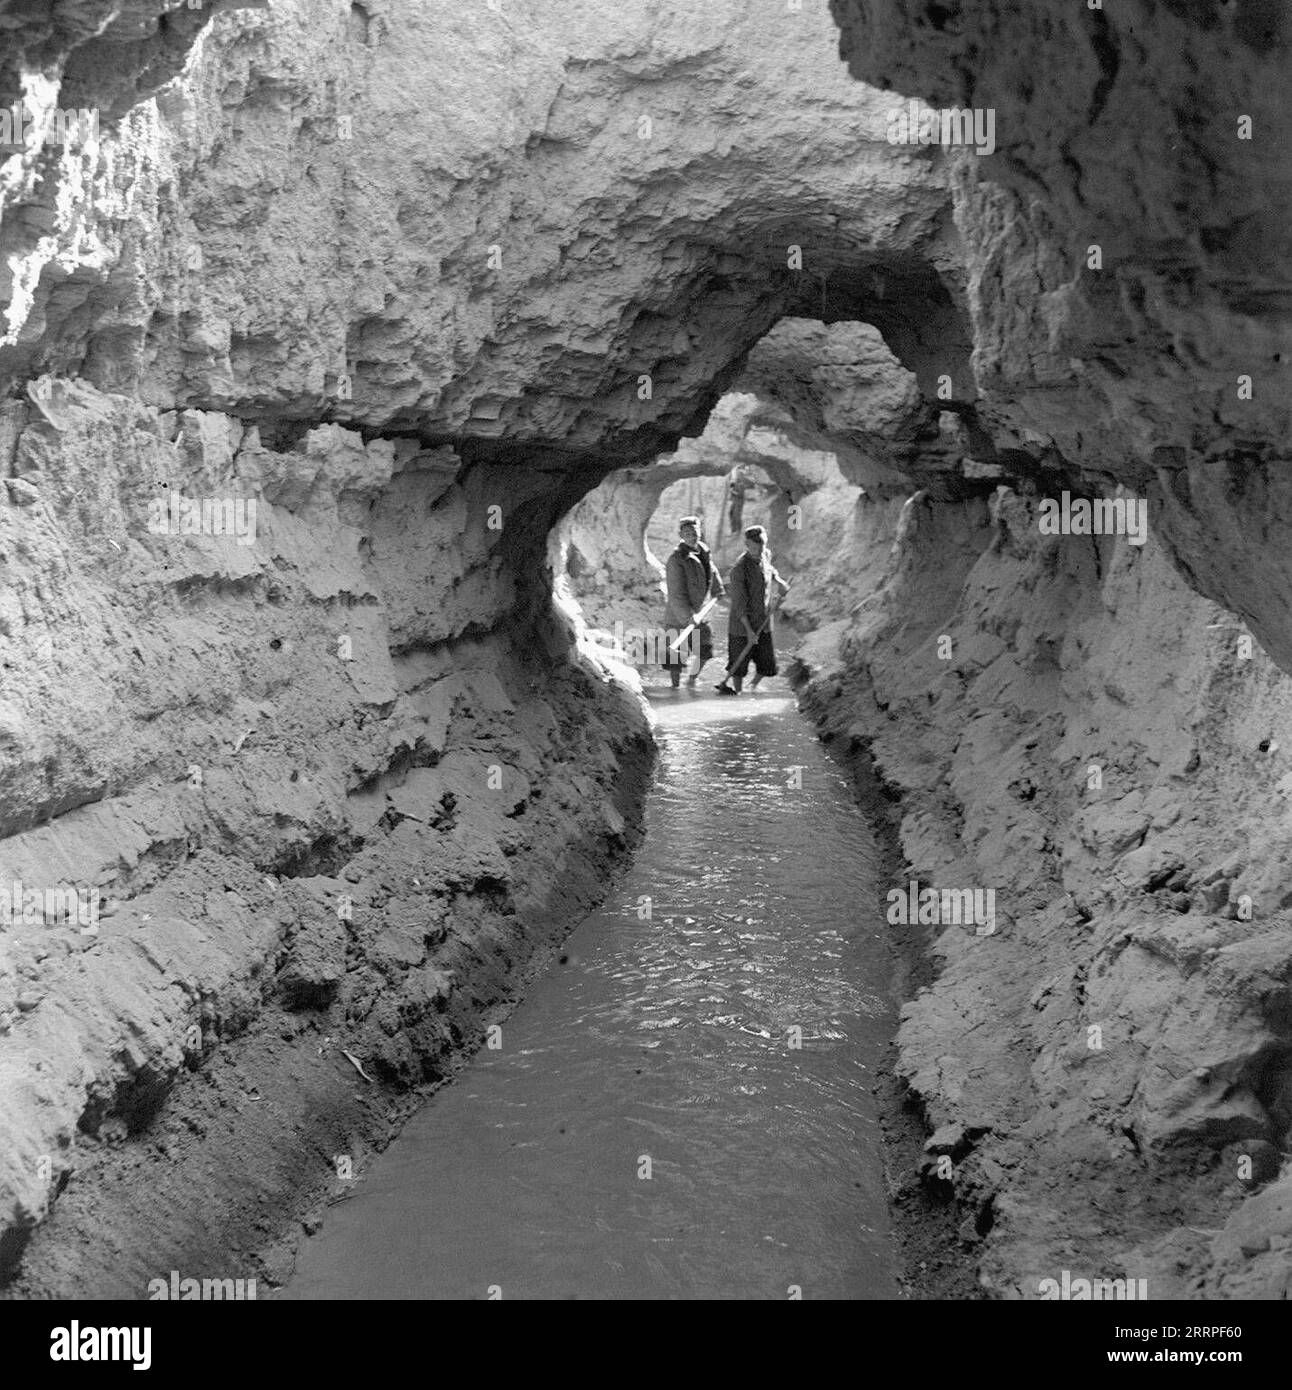 230320 -- URUMQI, March 20, 2023 -- This file photo taken on May 9, 1963 shows local farmers checking the conditions of water flow along an underground channel in Turpan, northwest China s Xinjiang Uygur Autonomous Region. Located at the southern foot of the Tianshan Mountains, Turpan in Xinjiang Uygur Autonomous Region is one of the driest and hottest places in China, with an average annual precipitation of only 16 millimeters and evaporation of up to 3,000 millimeters. In order to make this vast Gobi into a comfortable and livable oasis, the local people found new way as water reserve in kar Stock Photo